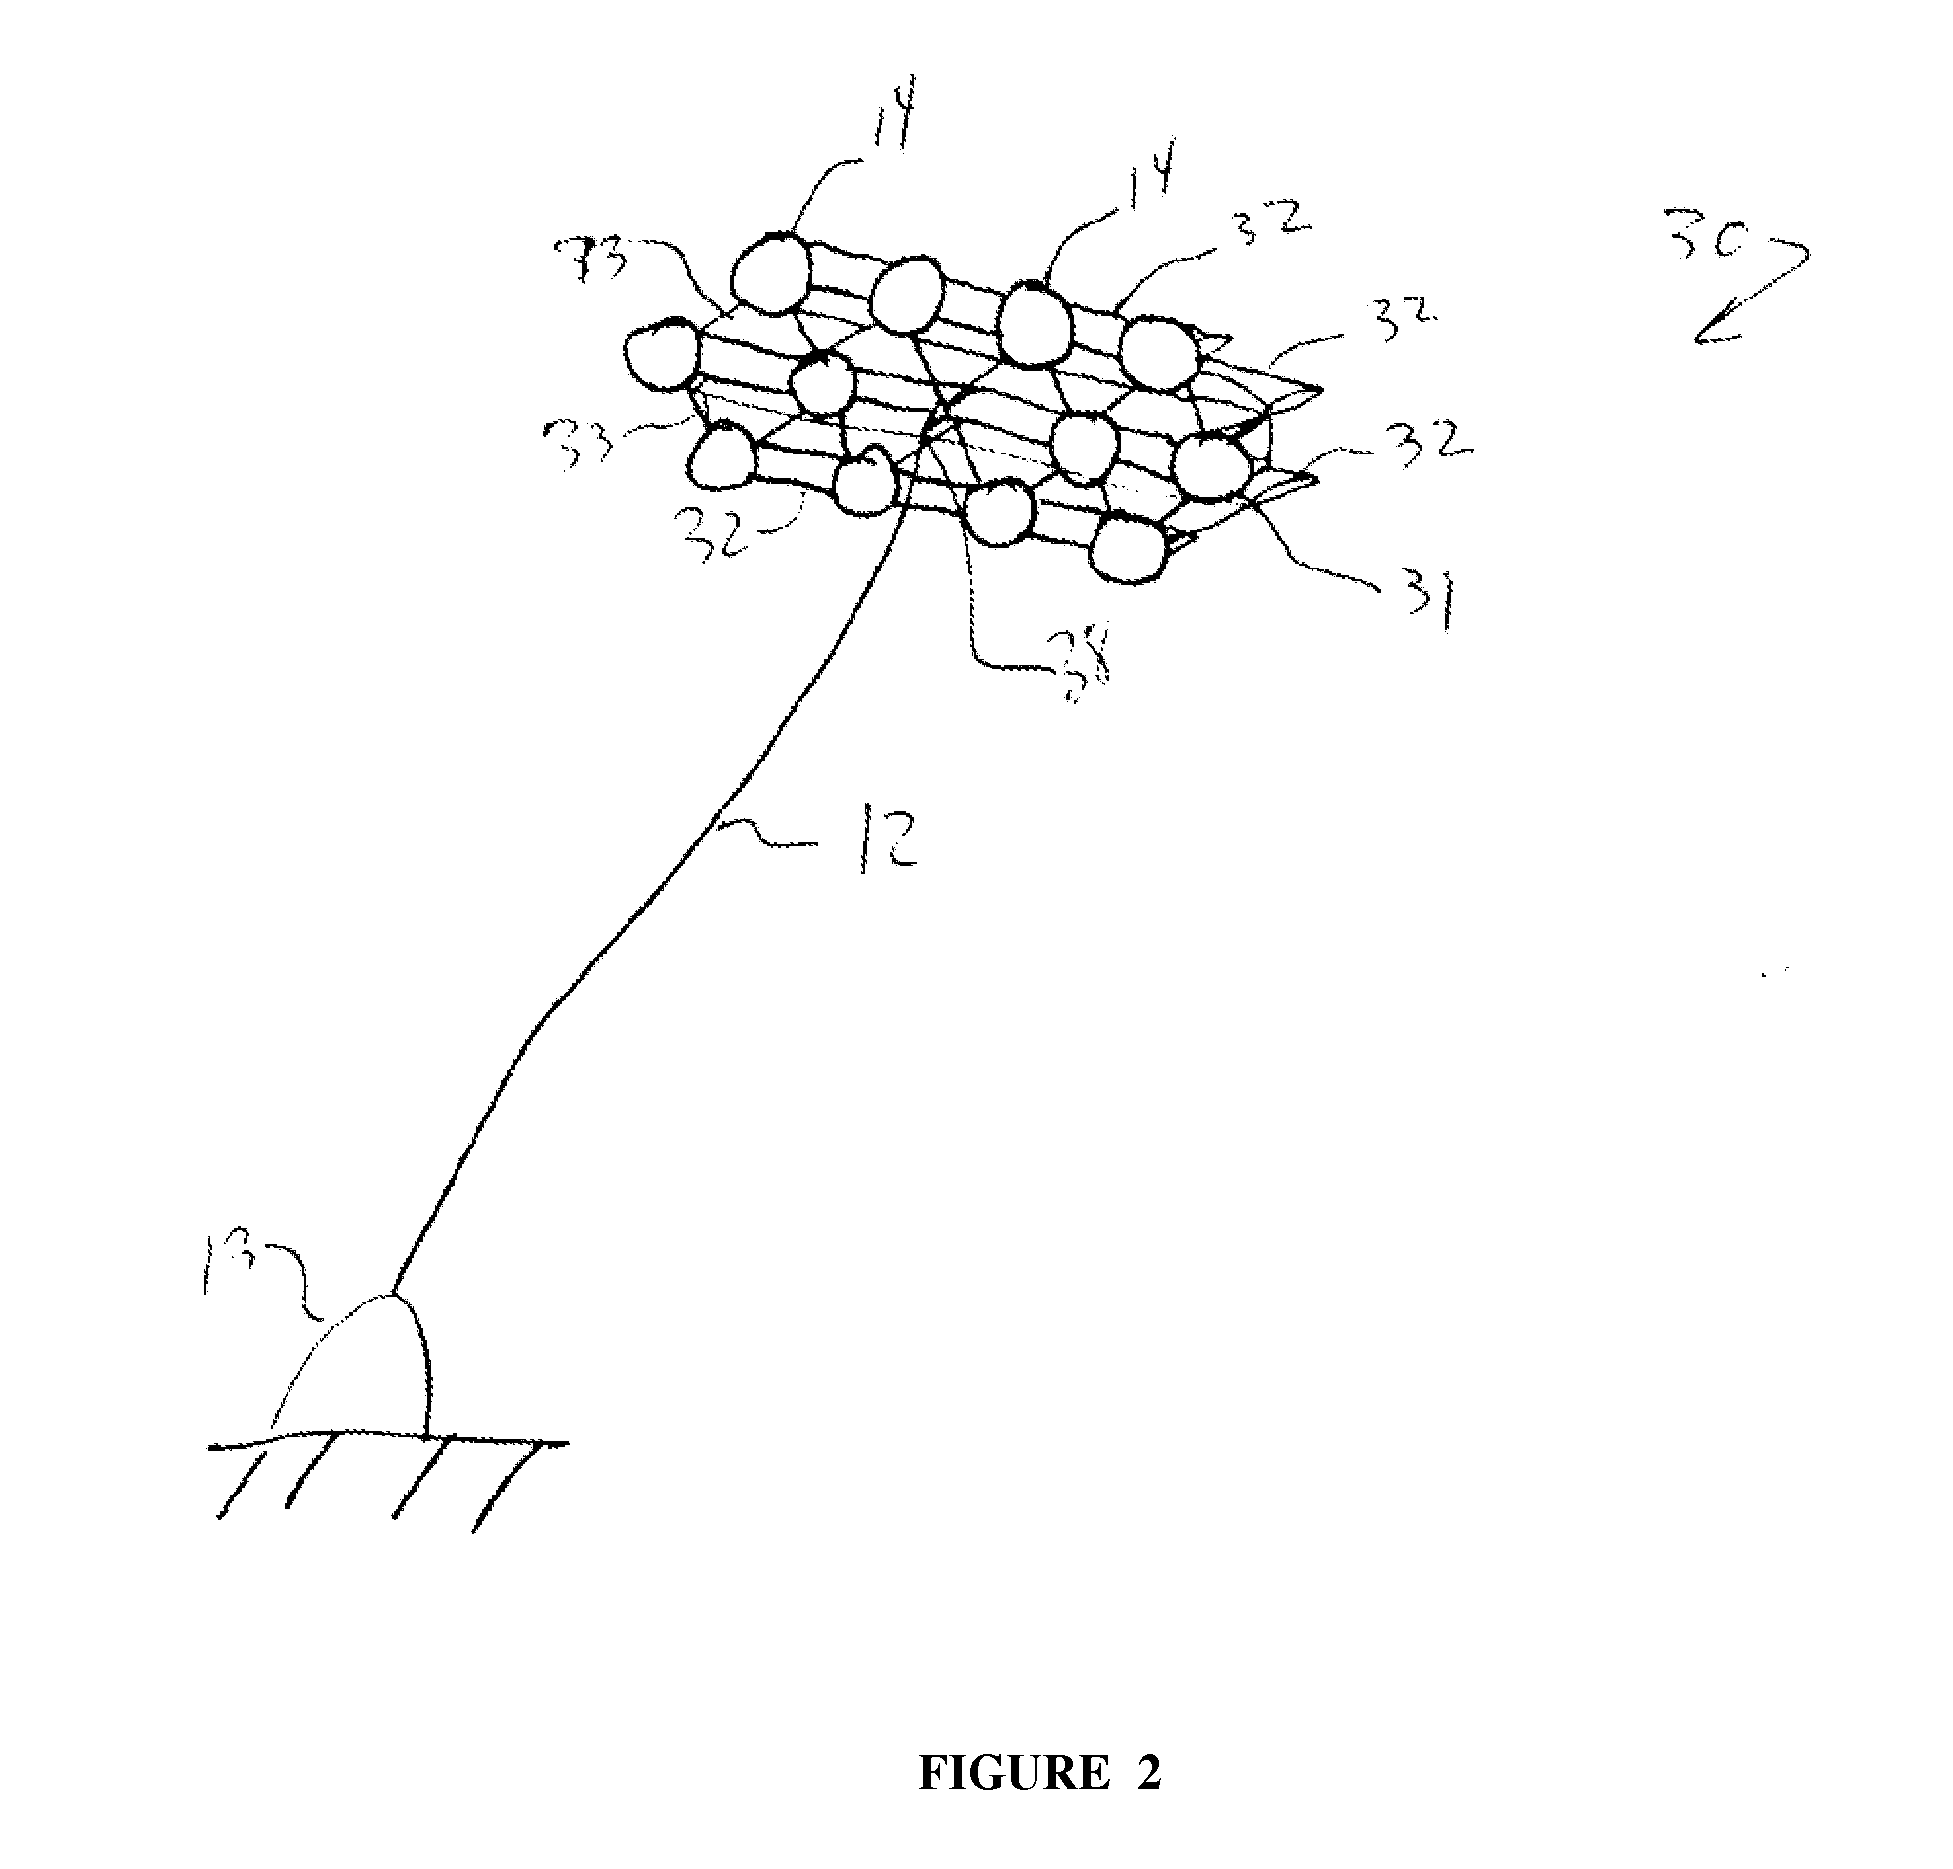 Airborne Power Generation System With Modular Structural Elements